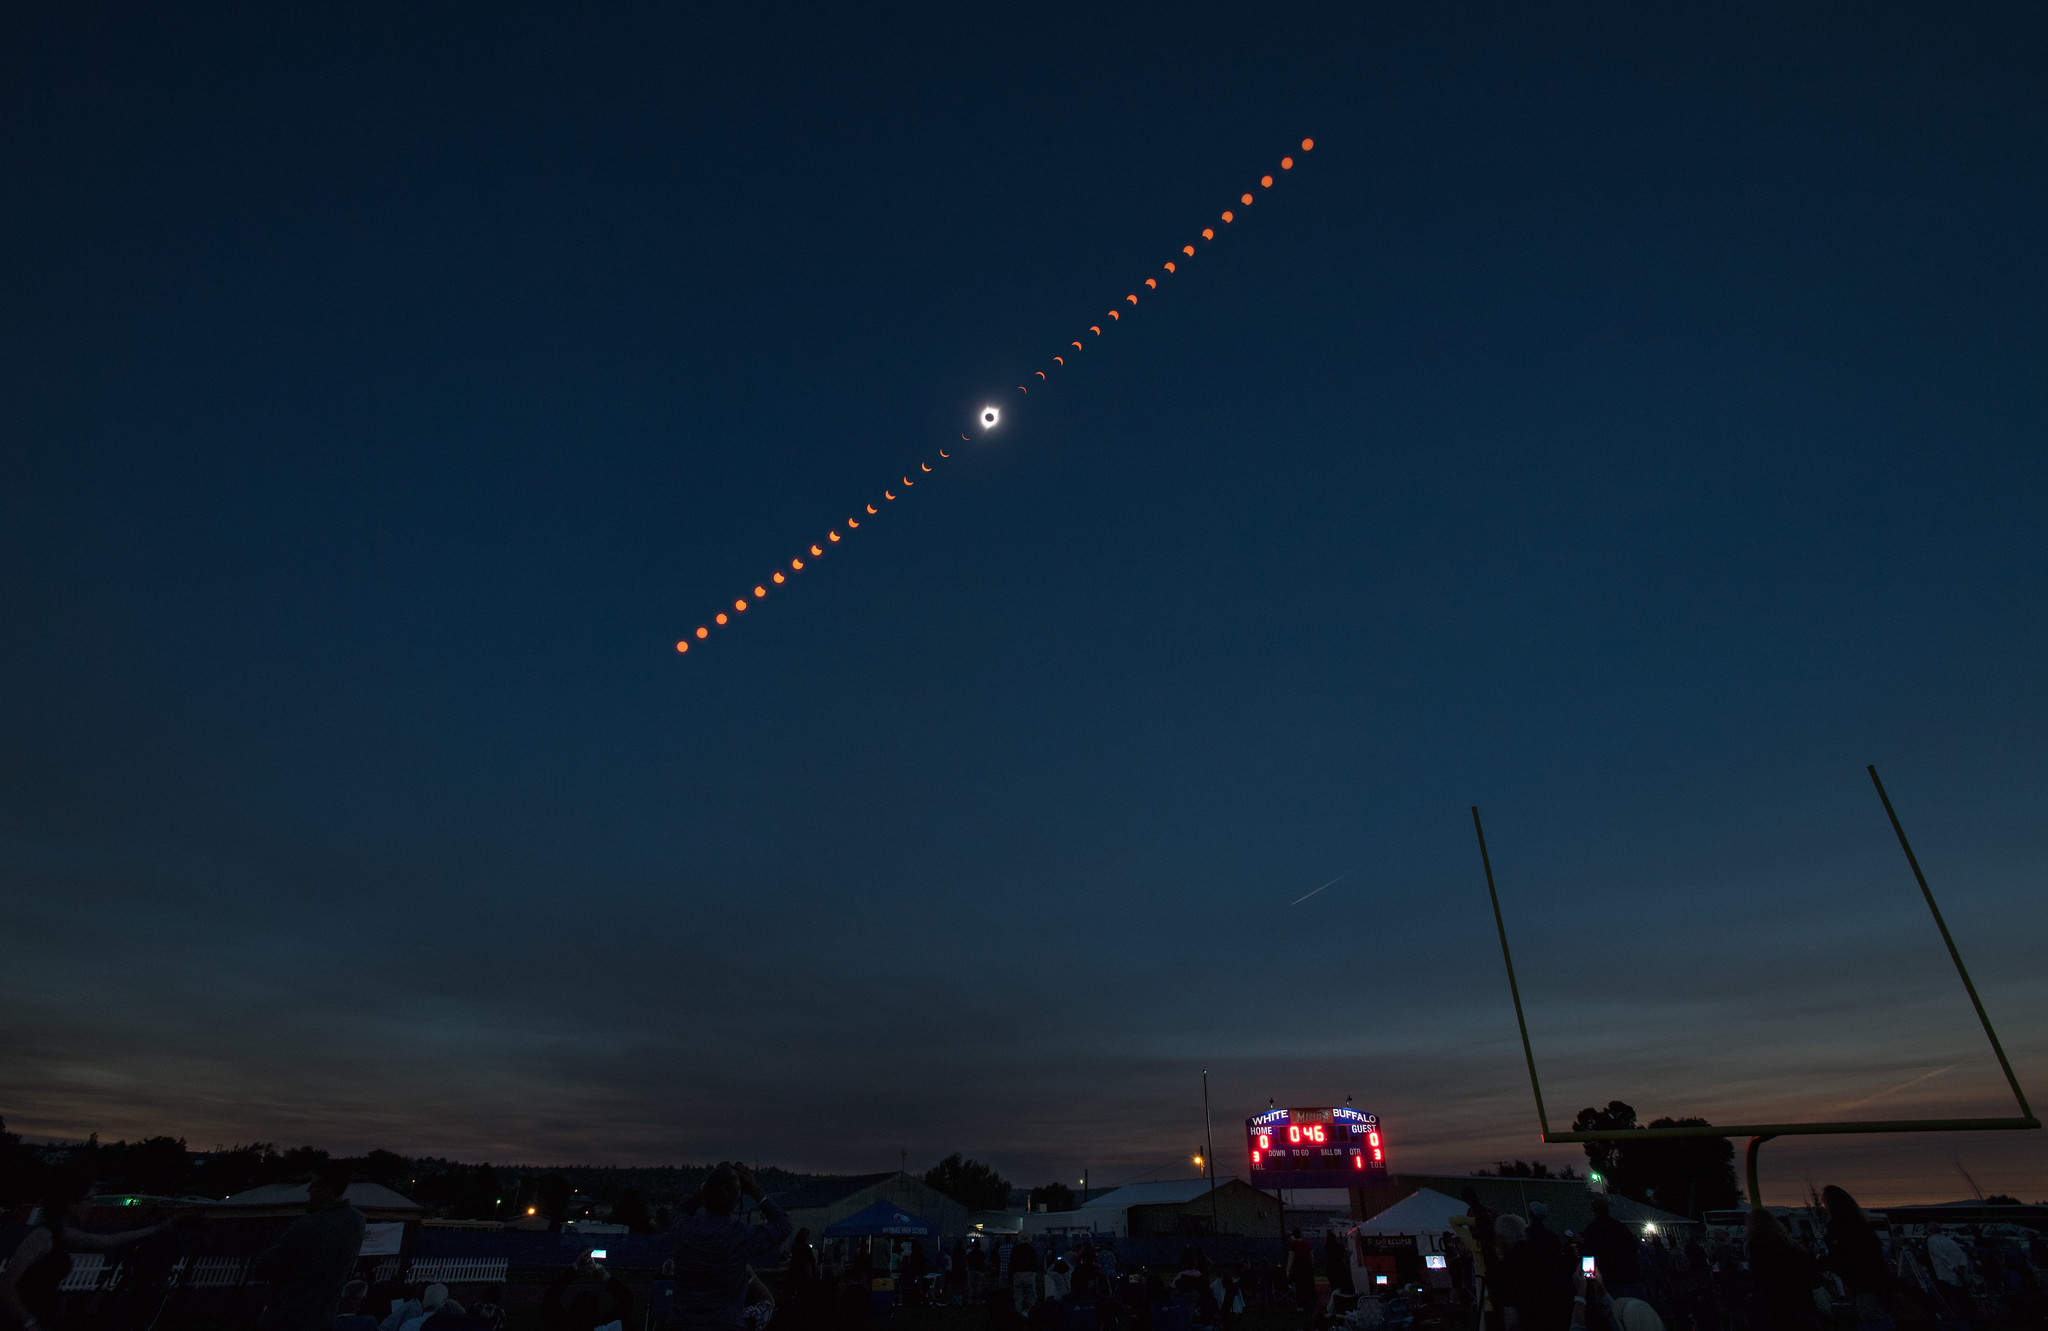 The phases of a total eclipse captured in sequence over a gathering of spectators.